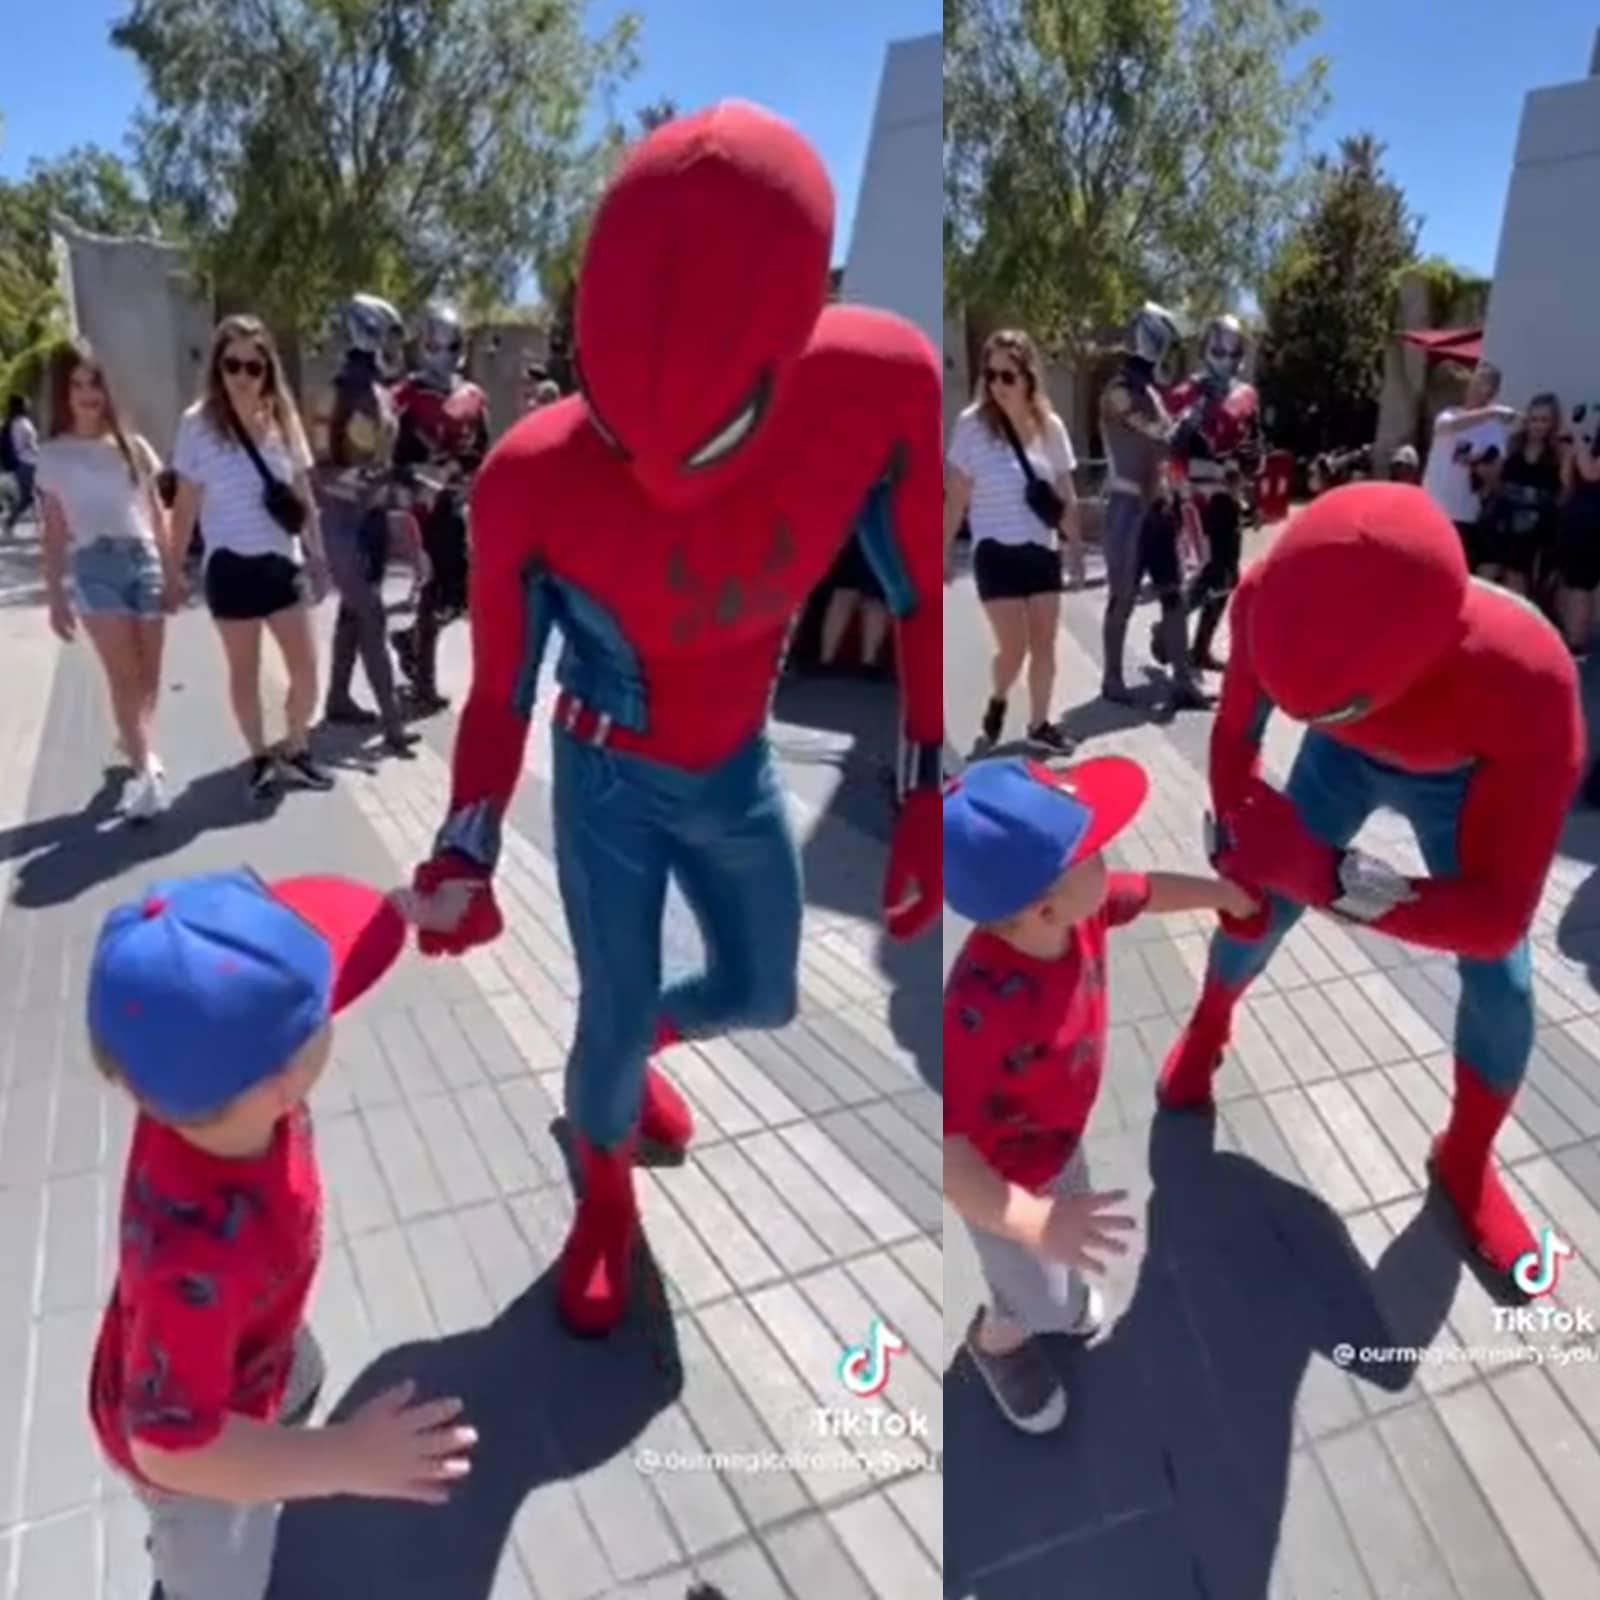 There He is': Little Boy With Spiderman Hat Meets His Superhero in Adorable  Video